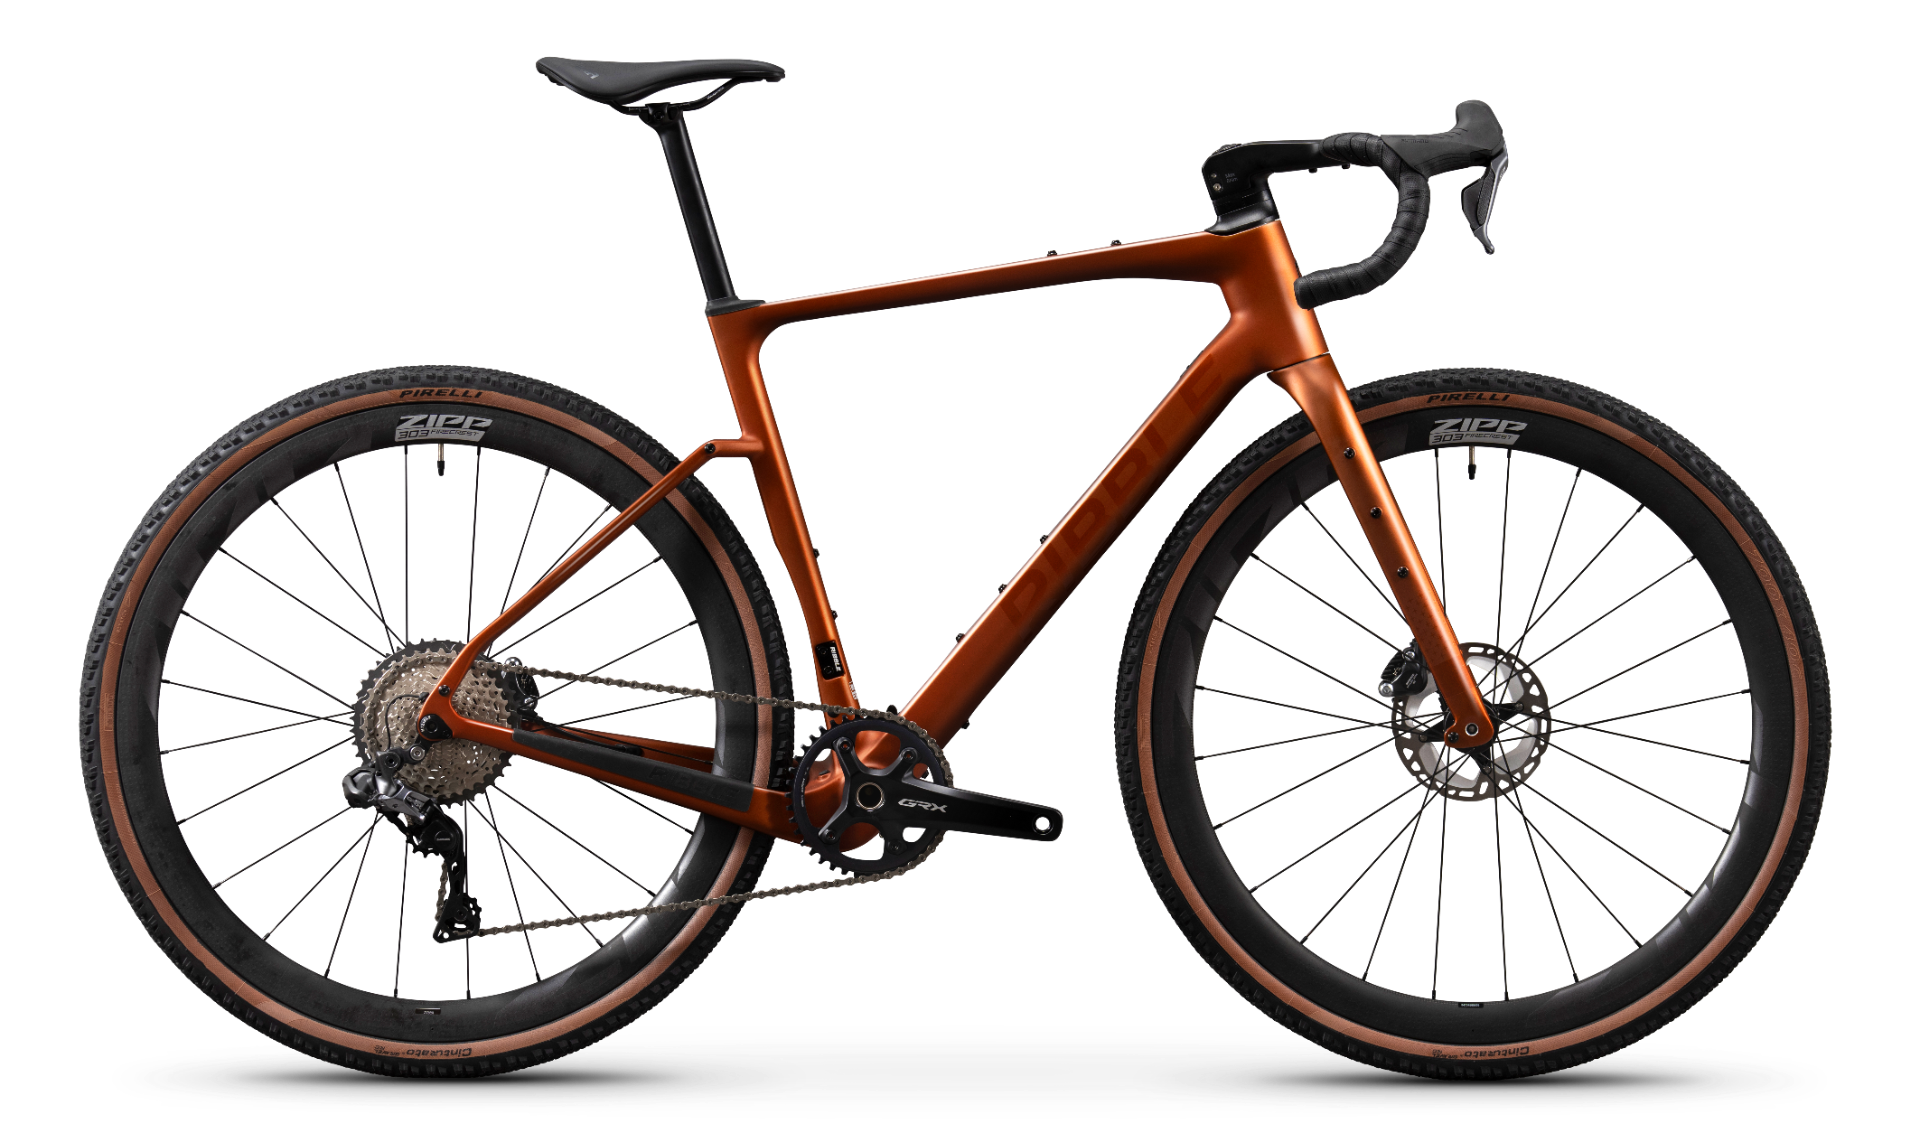 Ribble Gravel SL - Pro from Ribble Cycles